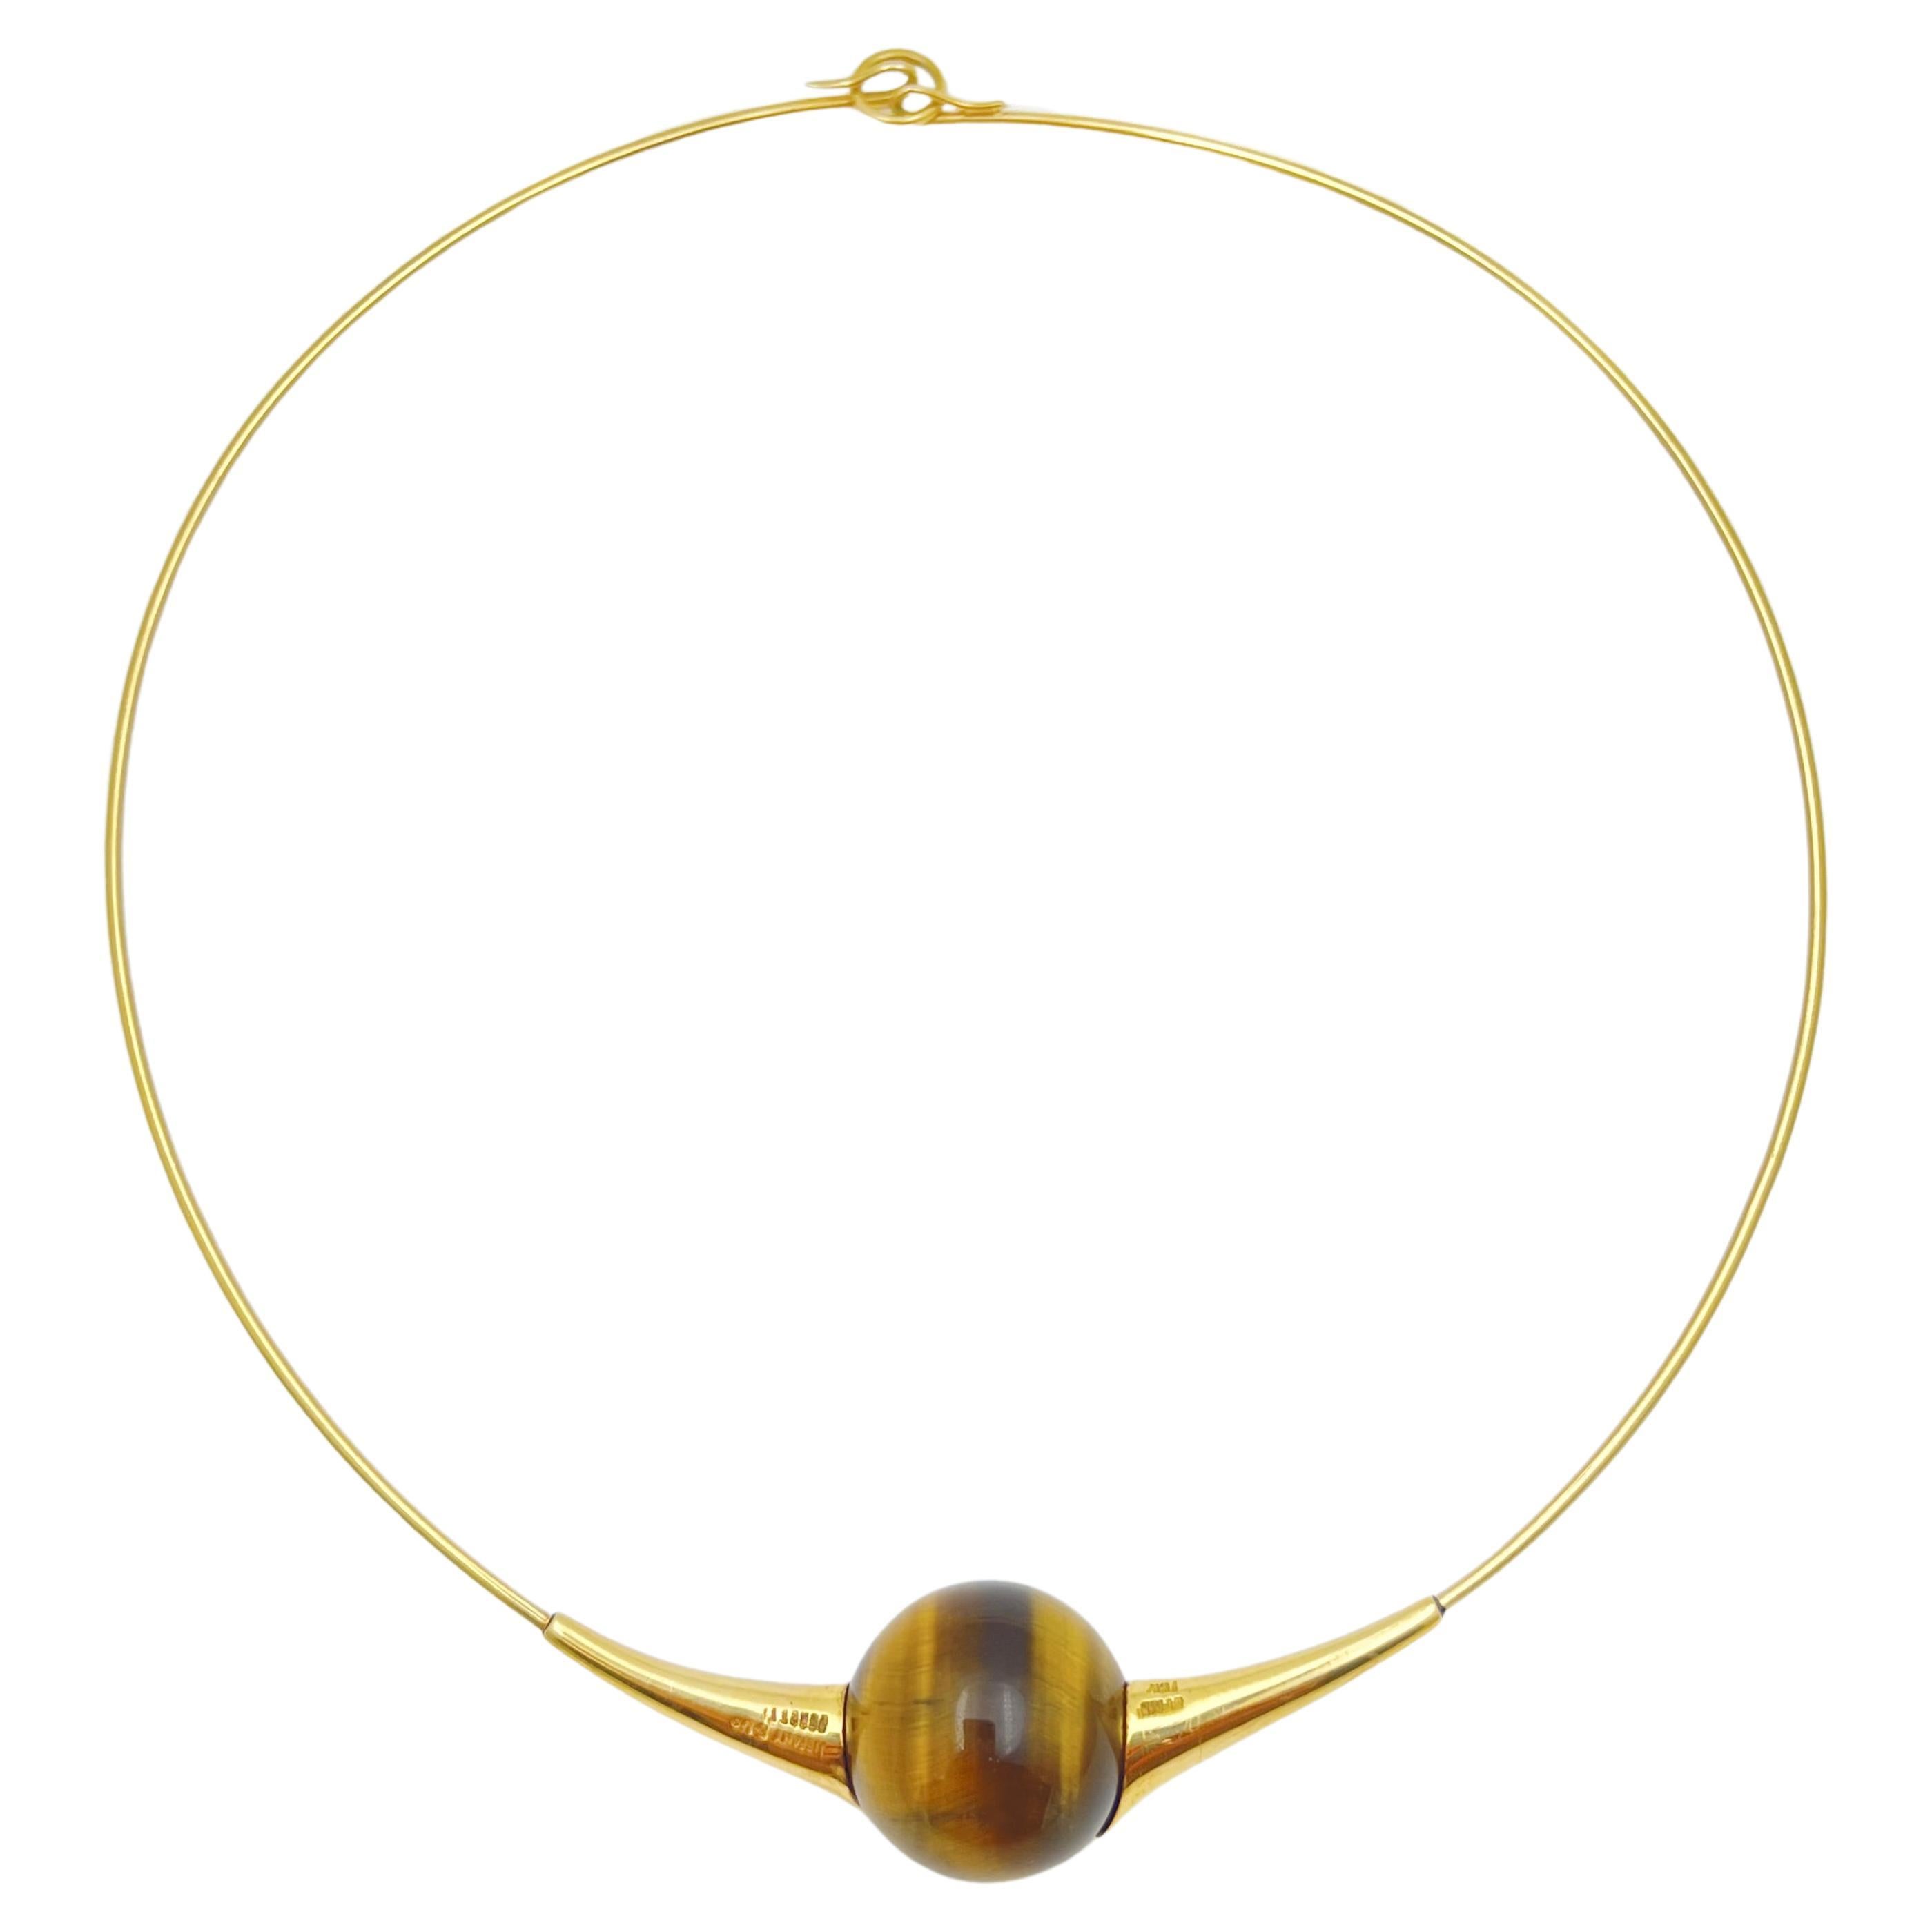 Rare and collectible 1970s design by Elsa Peretti for Tiffany & Co.  18k yellow gold wire collar centering a tiger eye spherical bead measuring 18.25mm in diameter.  Tiger eye bead is a rich golden brown color.  Neck wire has a 16